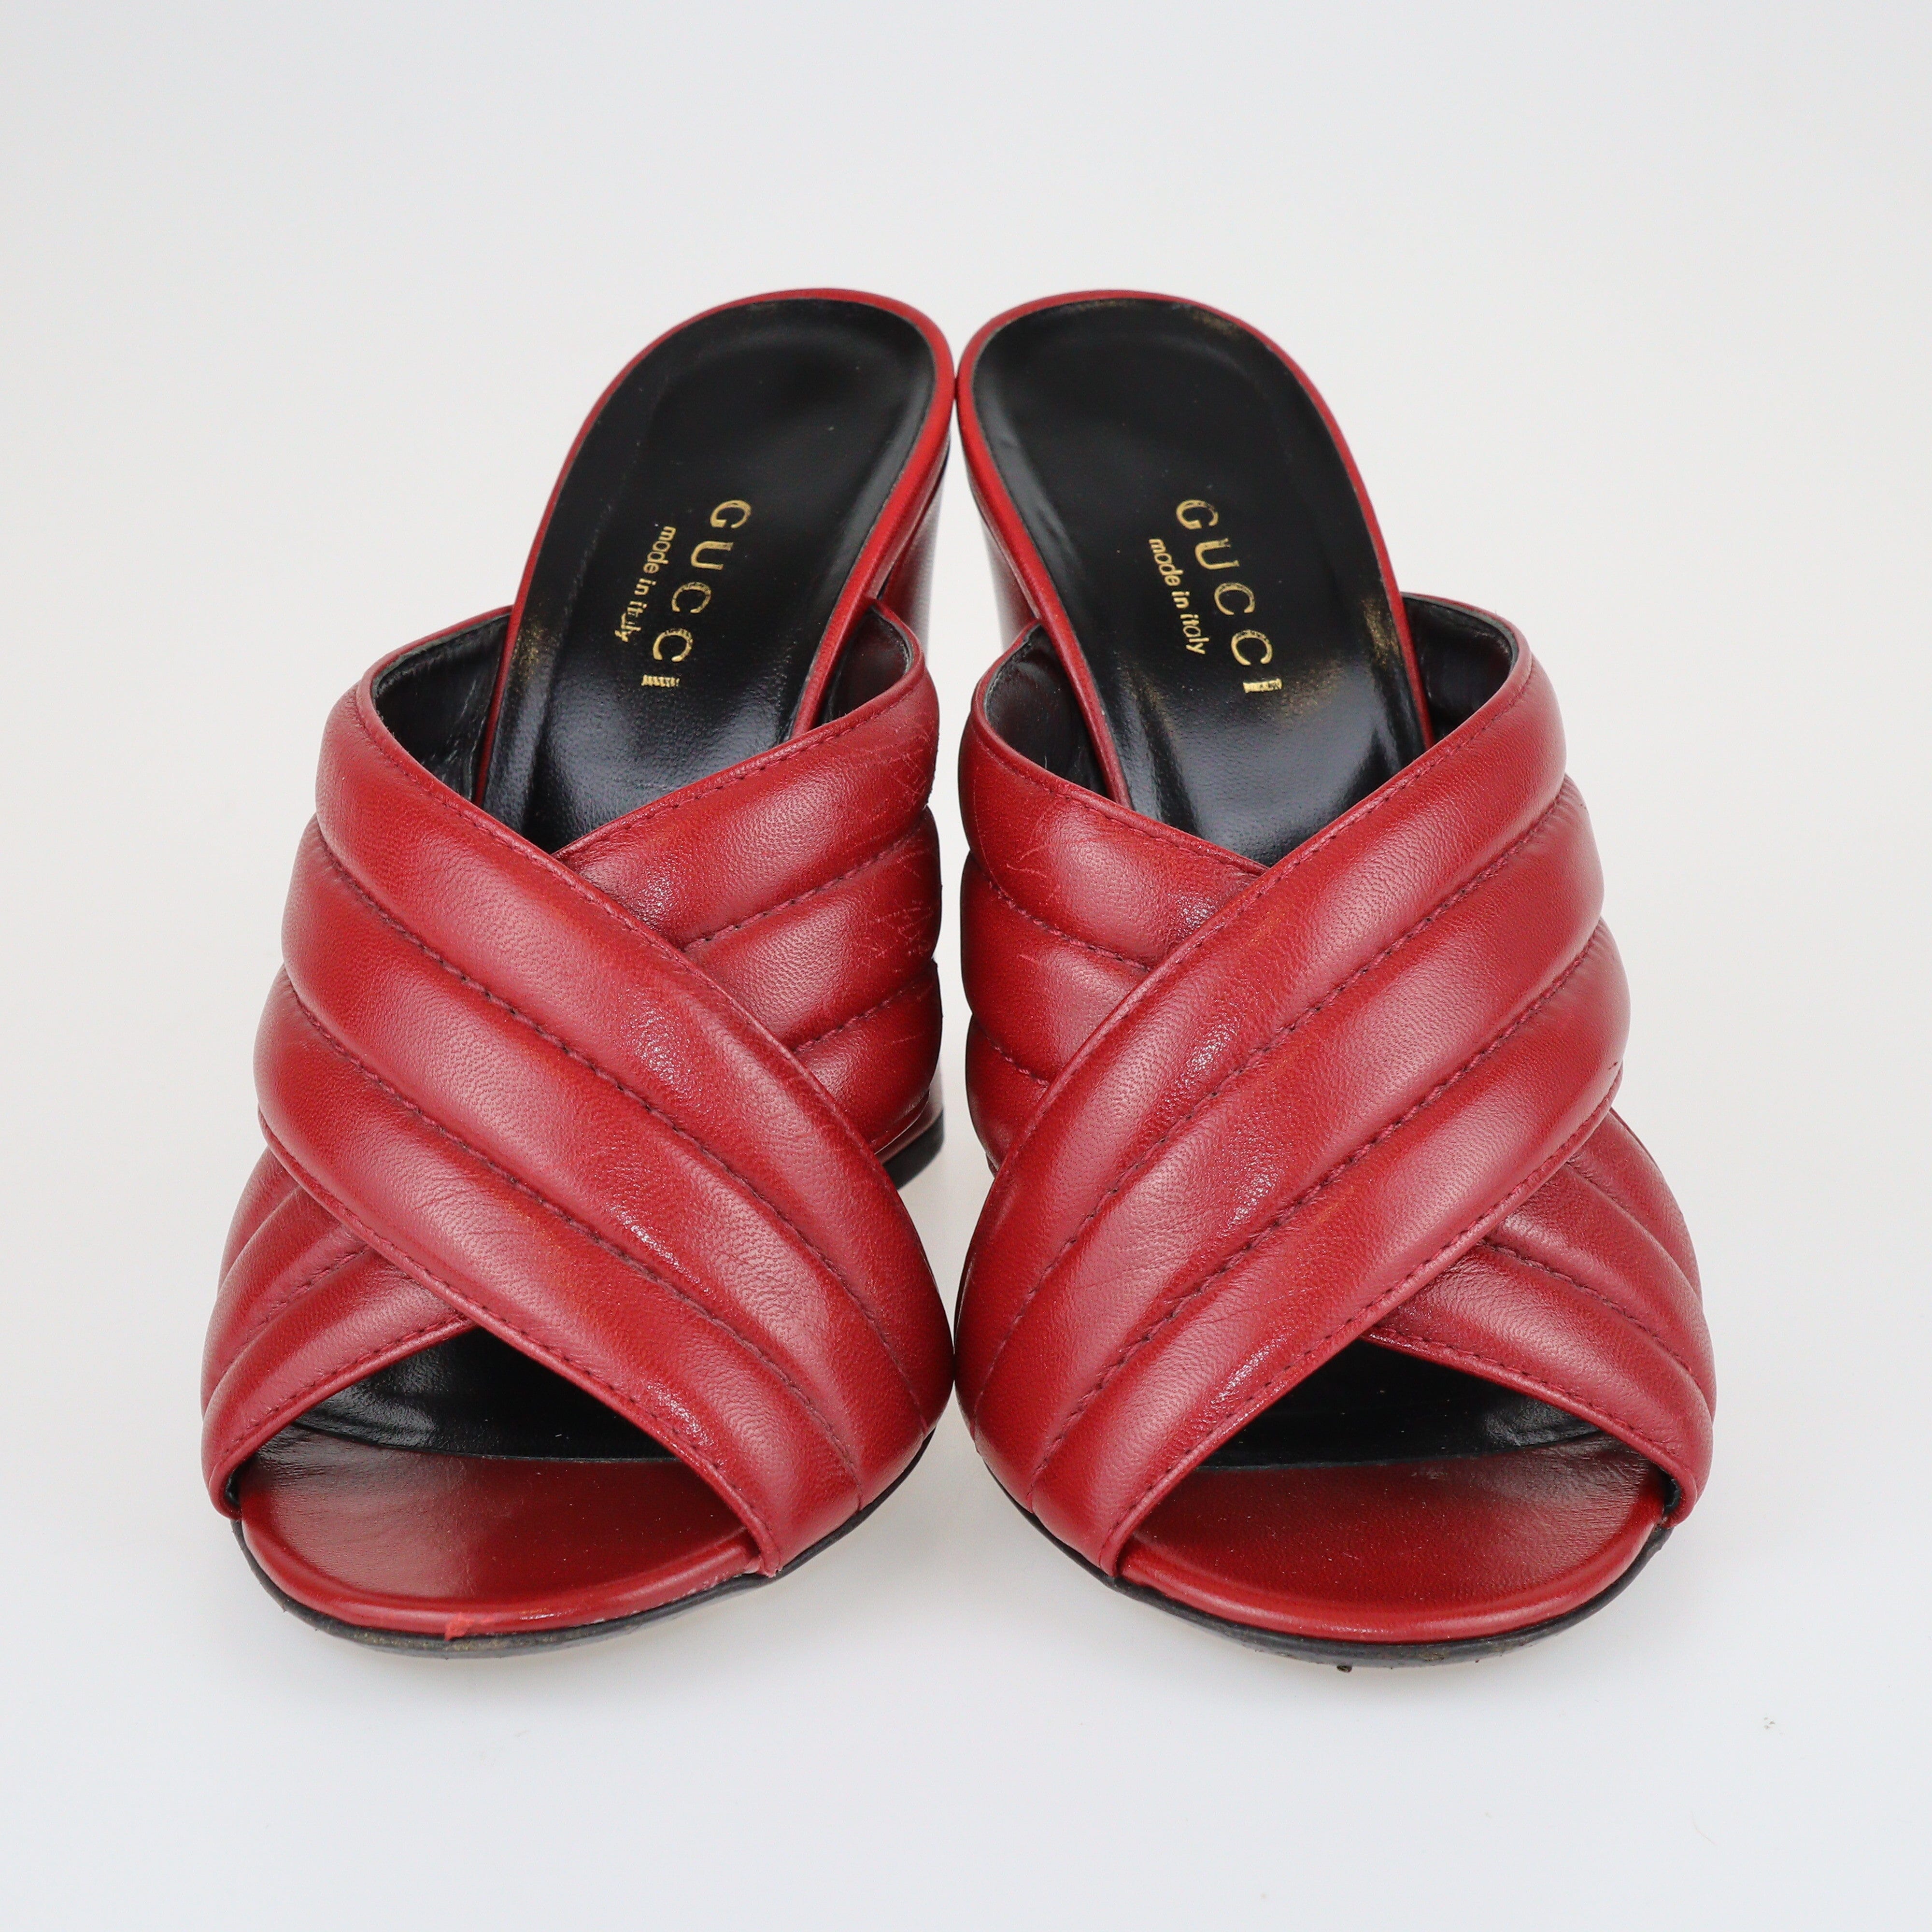 Red Crossover Slide Sandals Shoes Gucci 